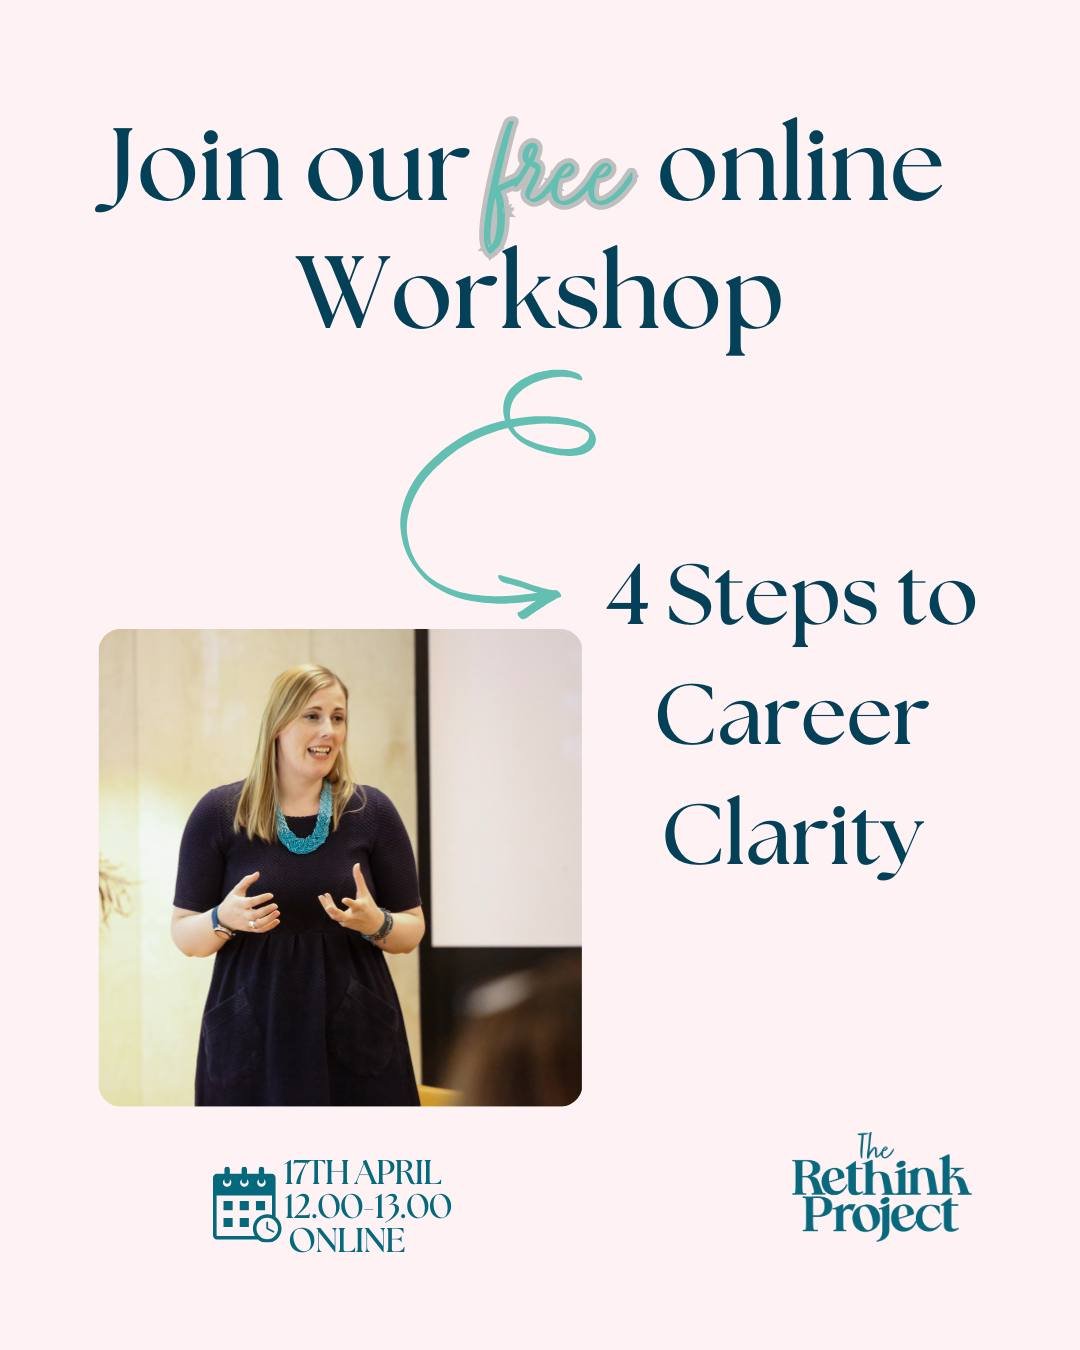 BOOK by midnight tonight to attend tomorrow's free online workshop - 4 Steps to Career Clarity &amp; Confidence. This is the last one we'll be running for a while so don't miss out!

If you're feeling frustrated and dissatisfied in your career, looki